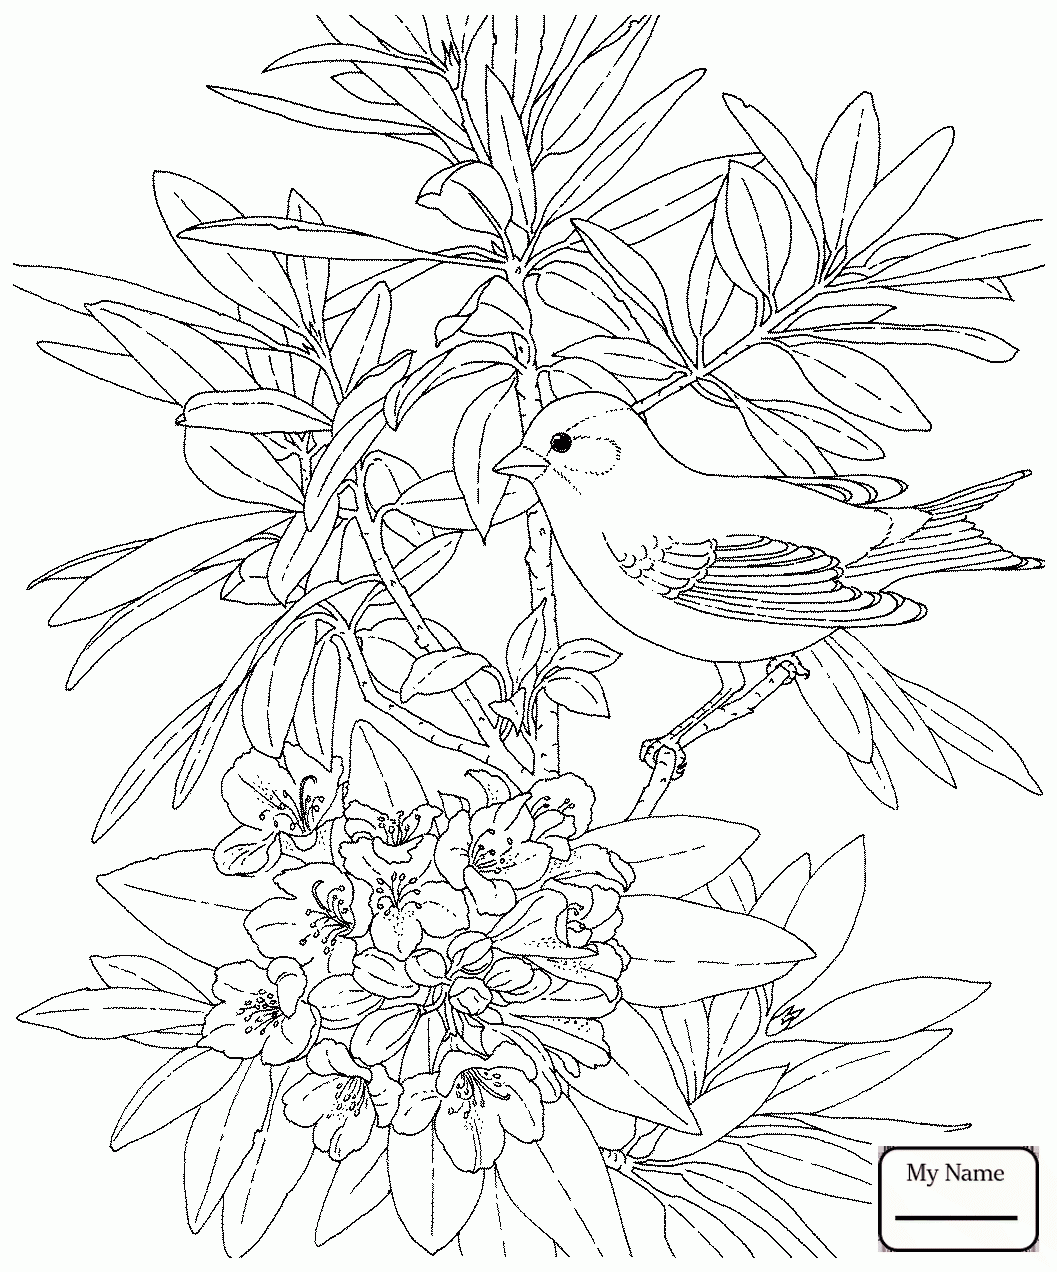 28+ new photograph Dandelion Coloring Page : Dandelion Coloring Page at